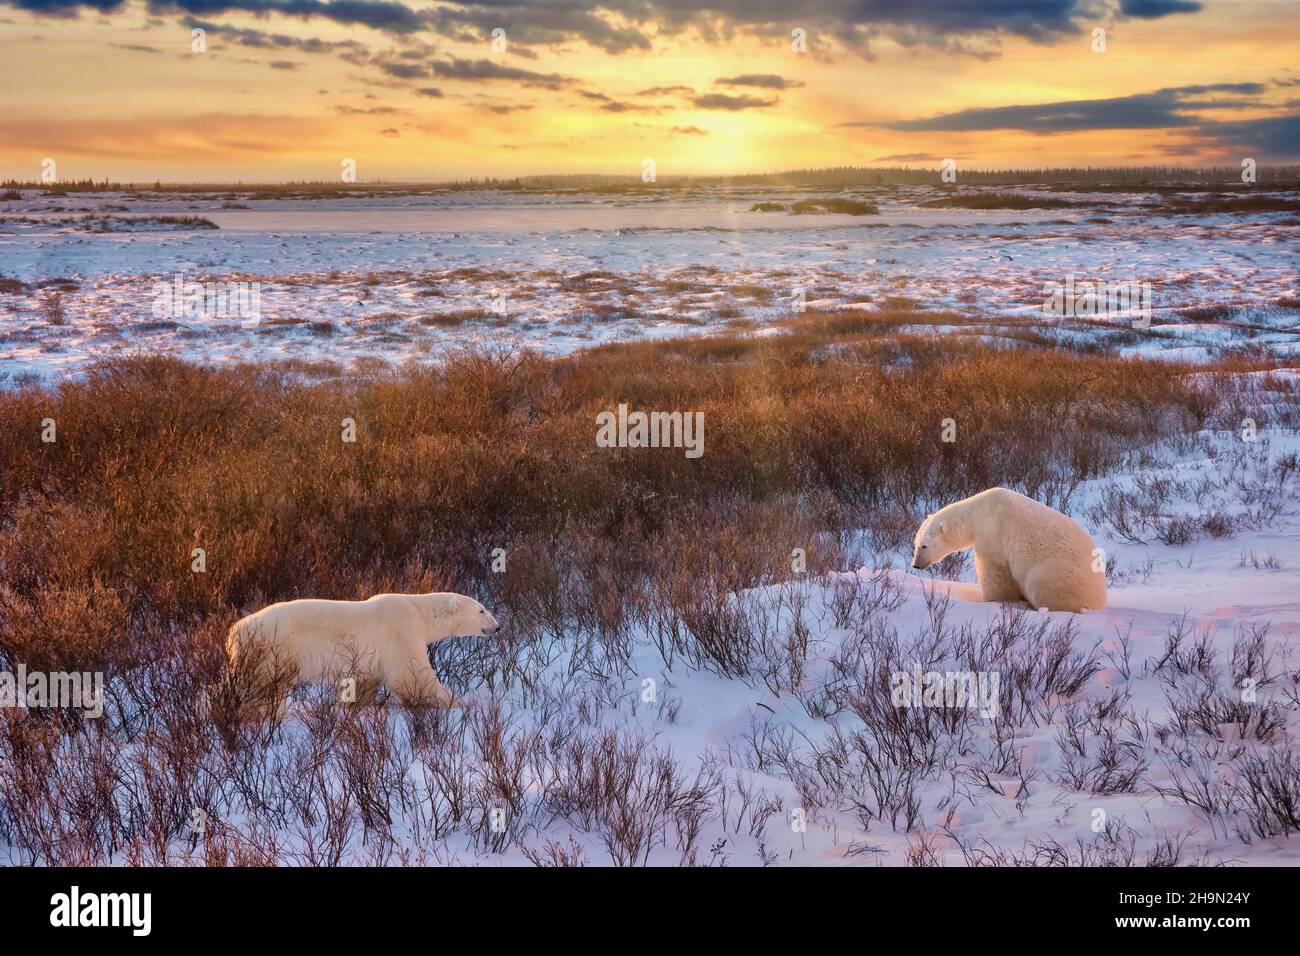 Two wild polar bears (Ursus maritimus) about to meet each other at sunrise, in their natural habitat with willow shrubs and a snowy tundra landscape, Stock Photo